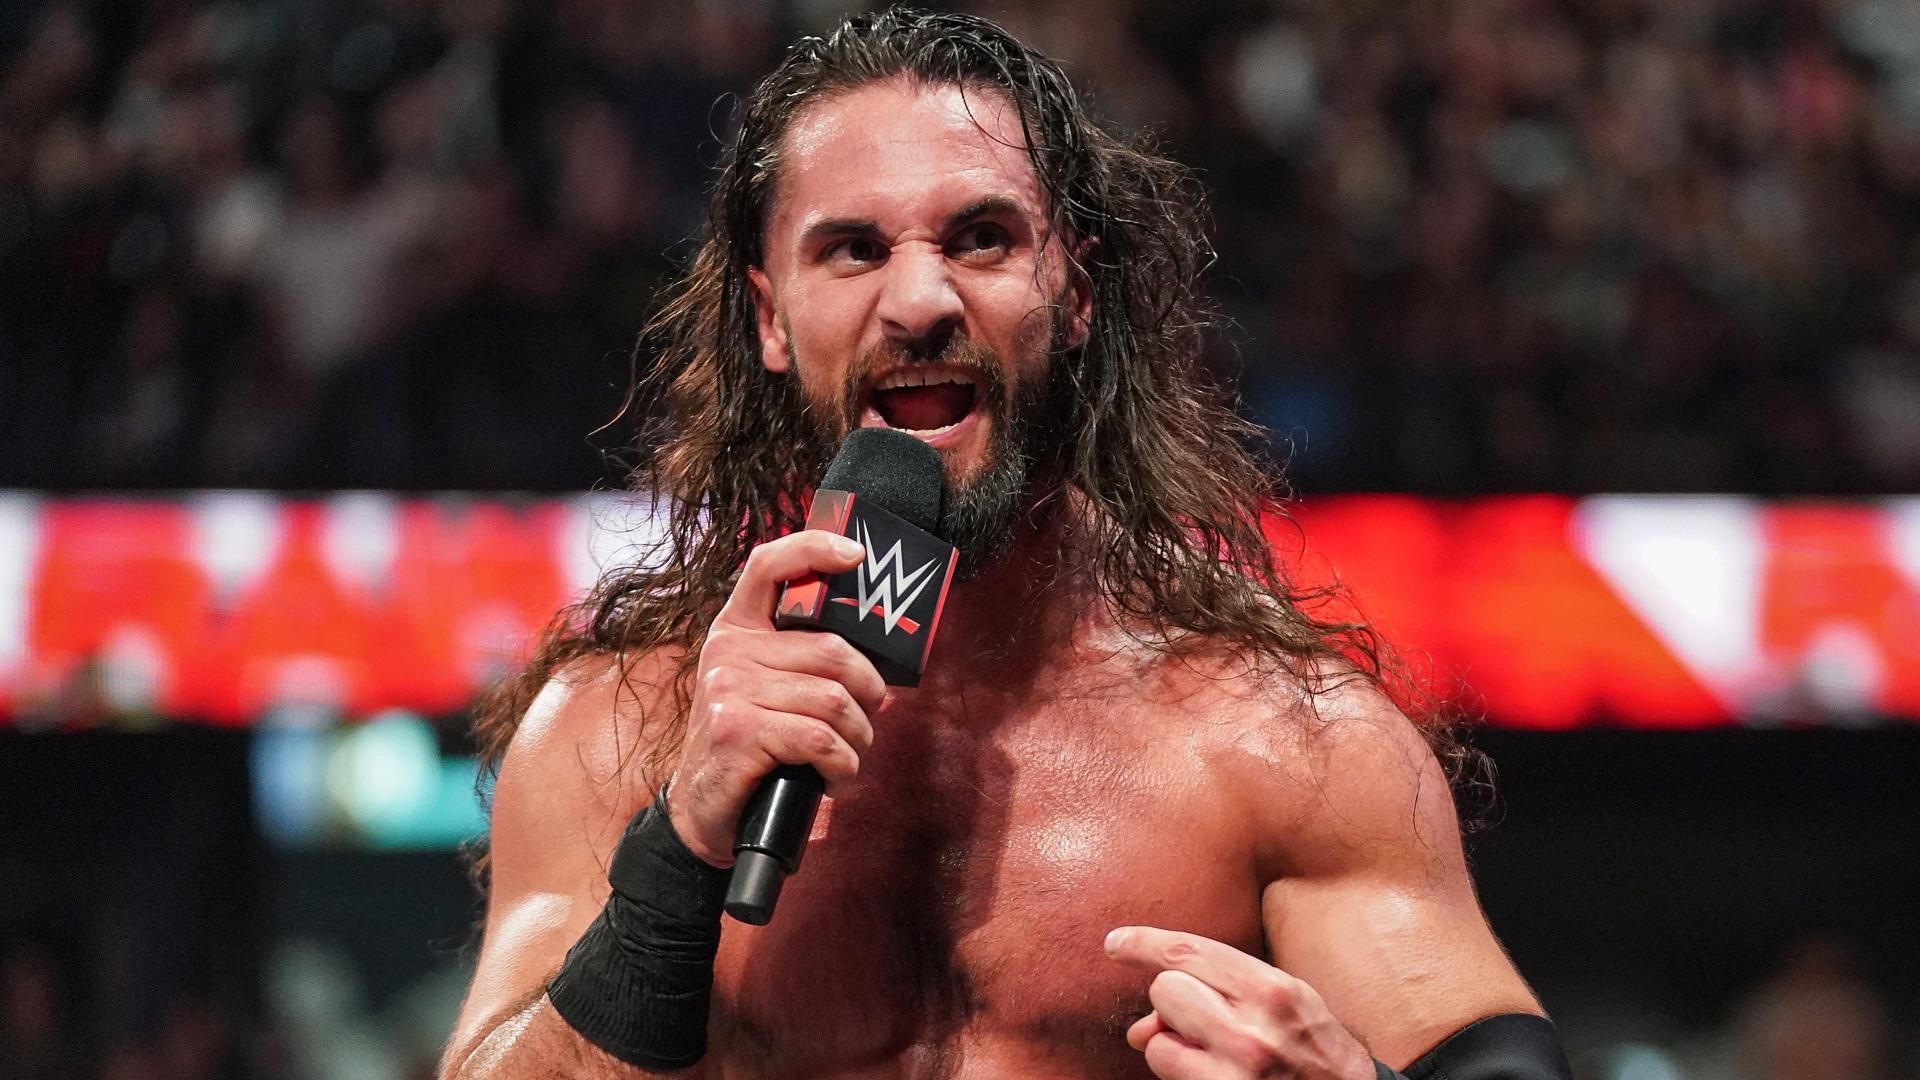 Seth Rollins may have bitten off more than he can chew on WWE RAW